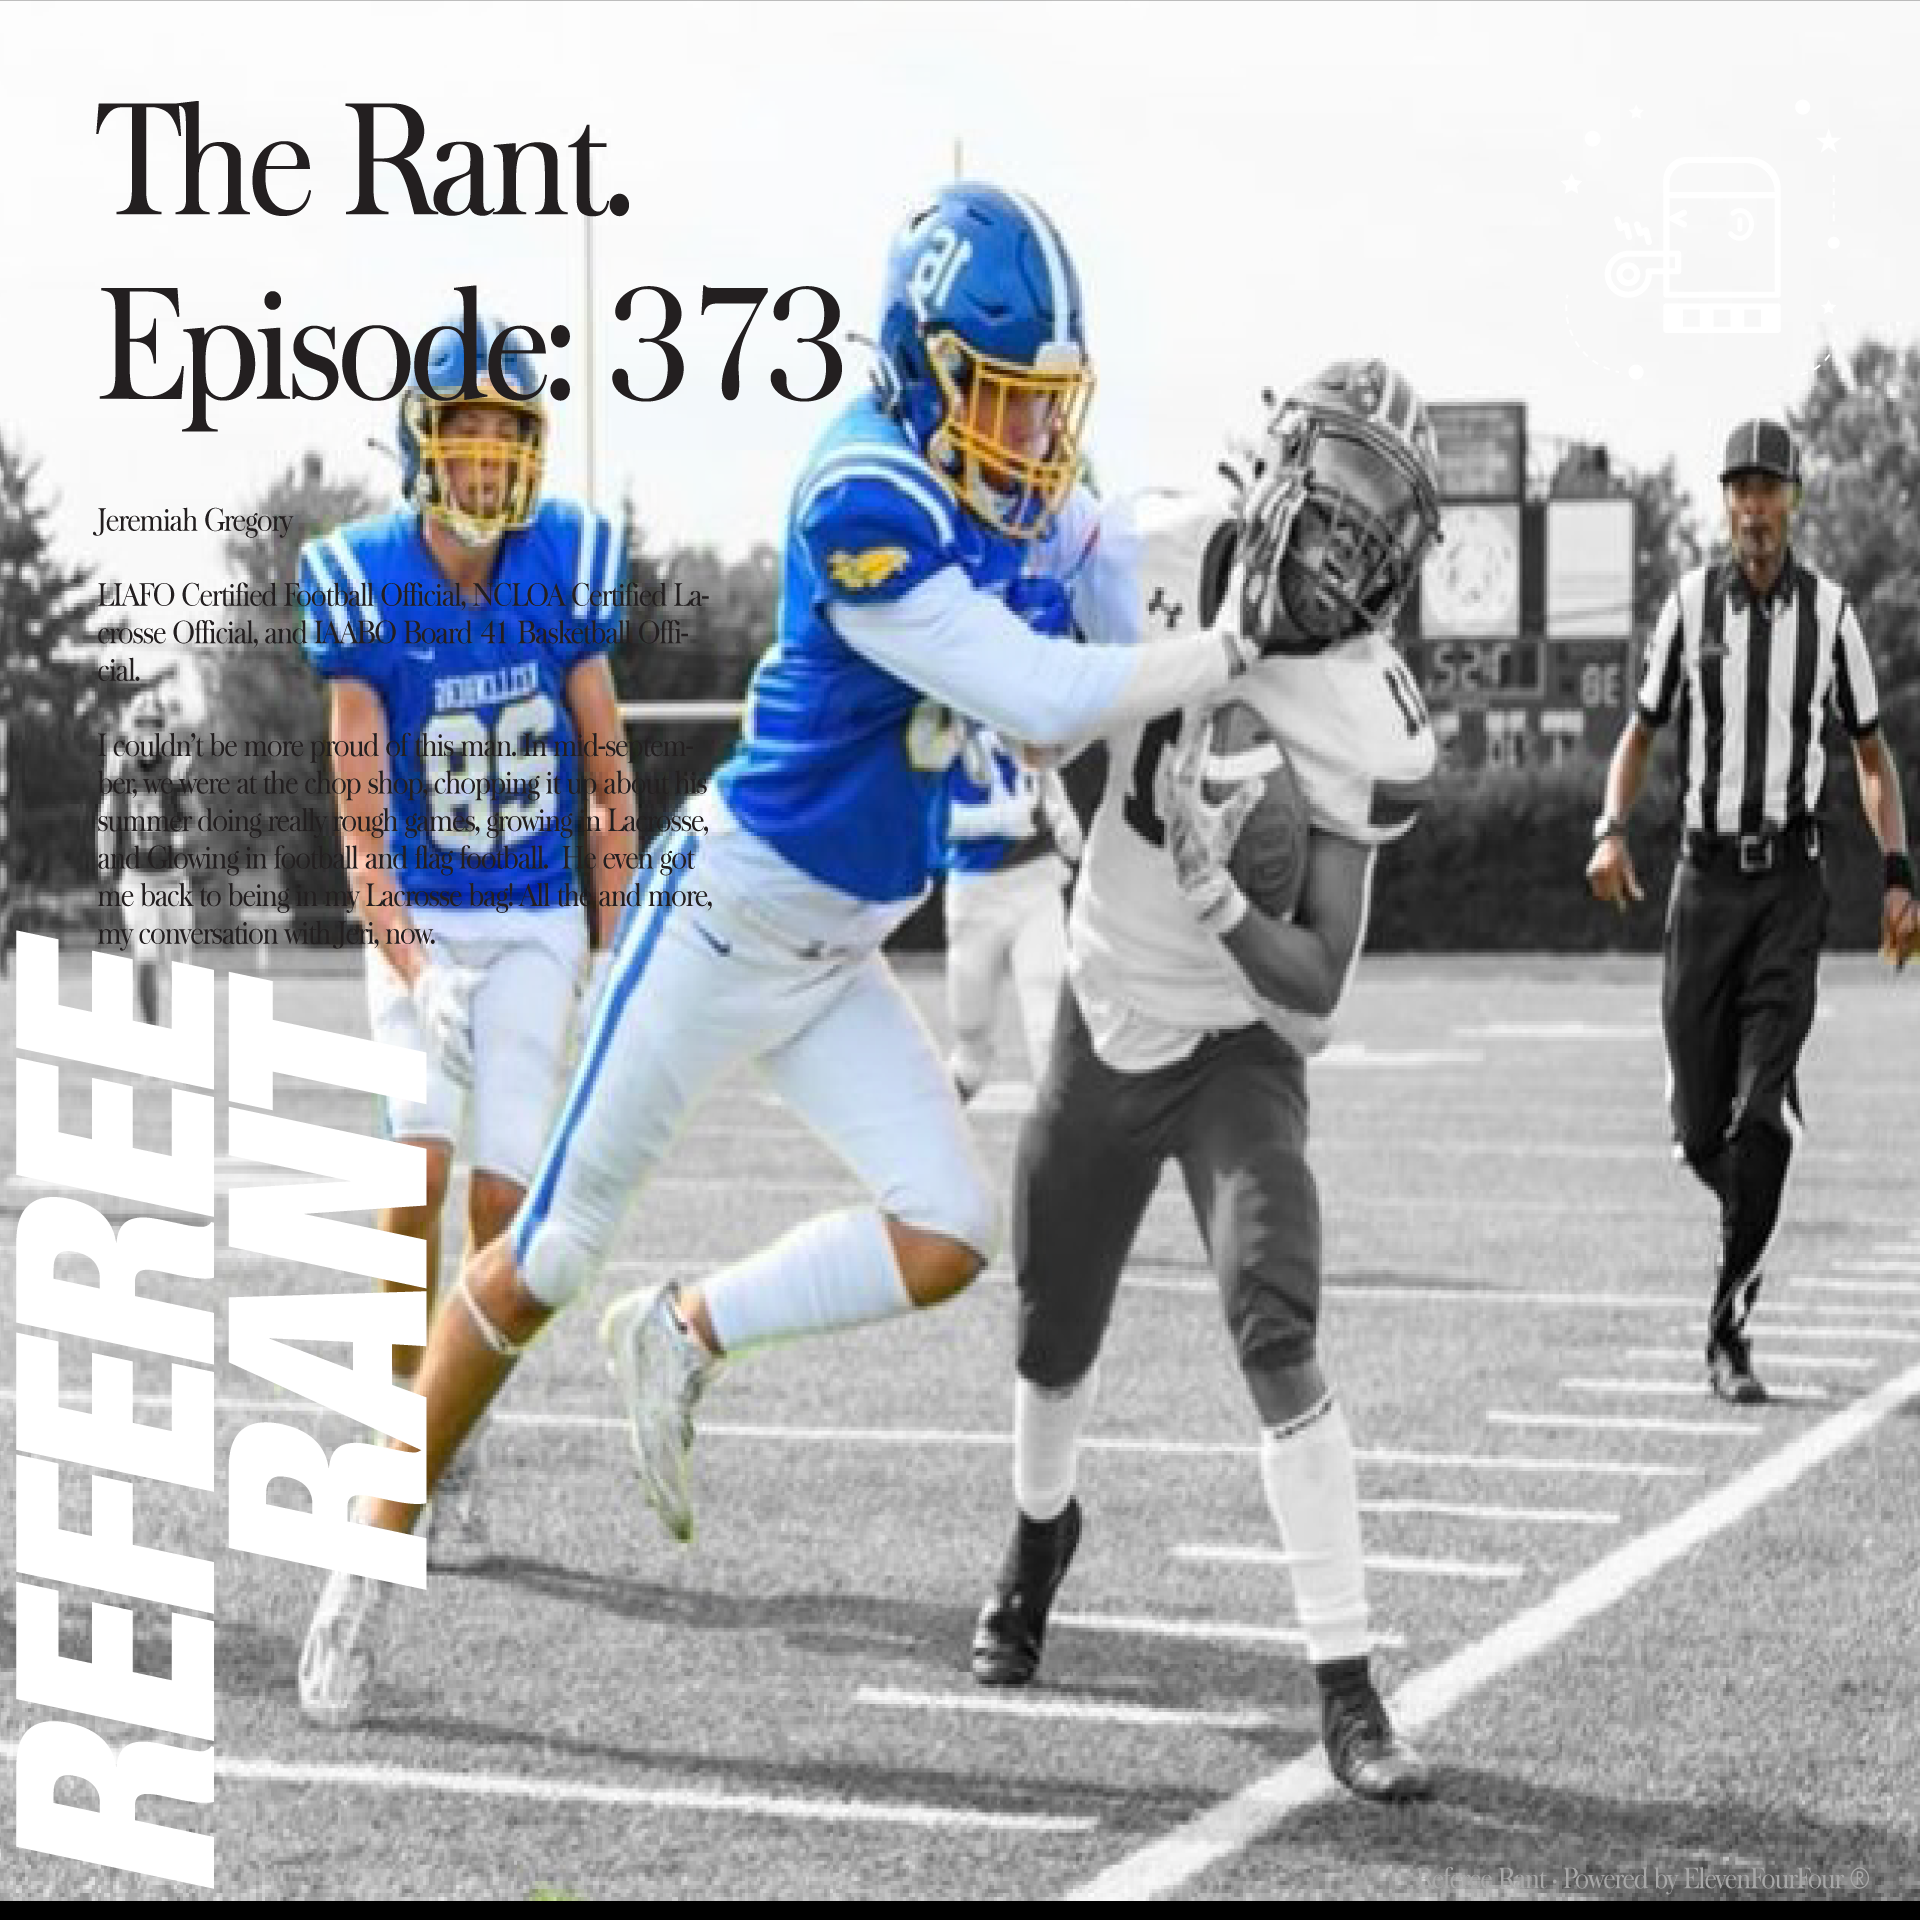 Episode 373, The Rant: Jeremiah Gregory